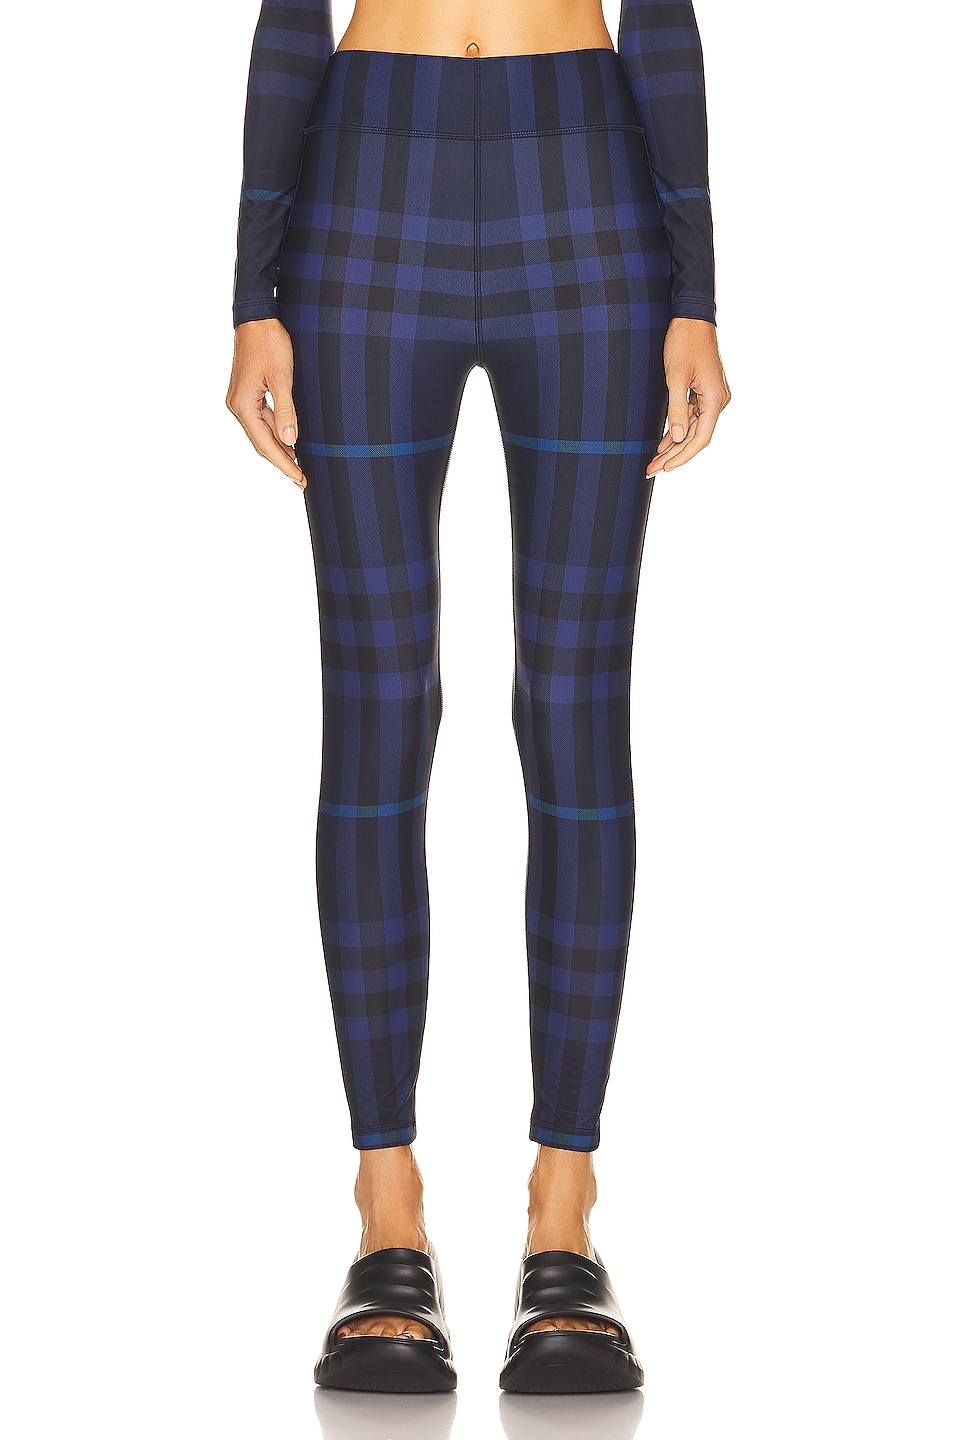 Image 1 of Burberry Madden Check Legging in Dark Charcoal Blue IP Check